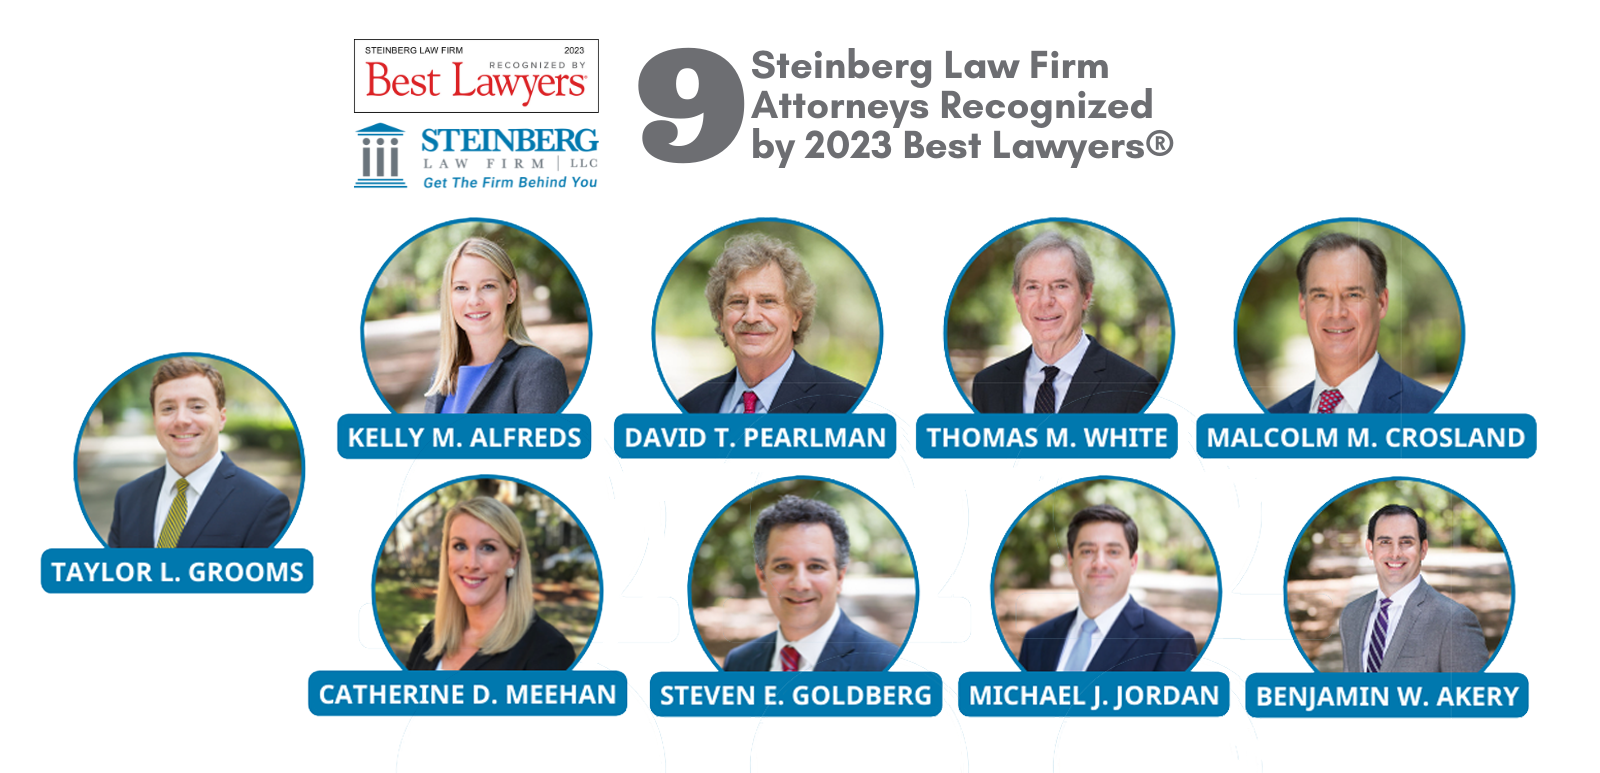 Nueve abogados de Steinberg Law Firm reconocidos en The Best Lawyers in America®.